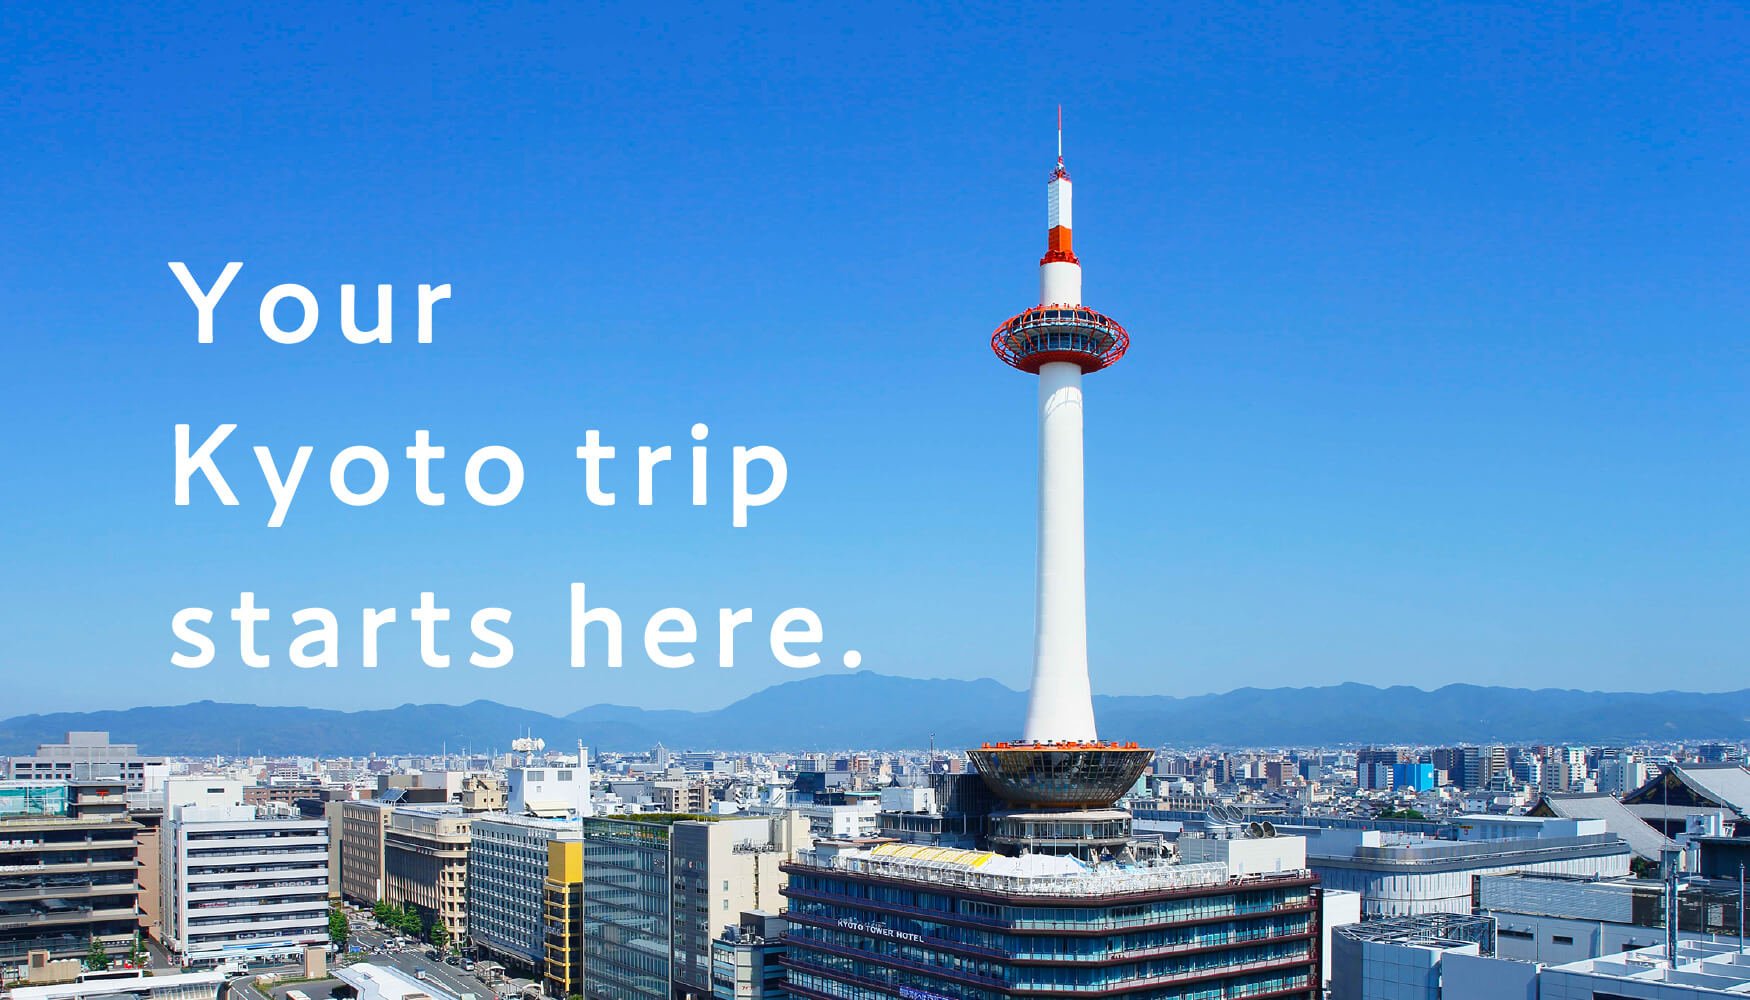 Your Kyoto tripstarts here.